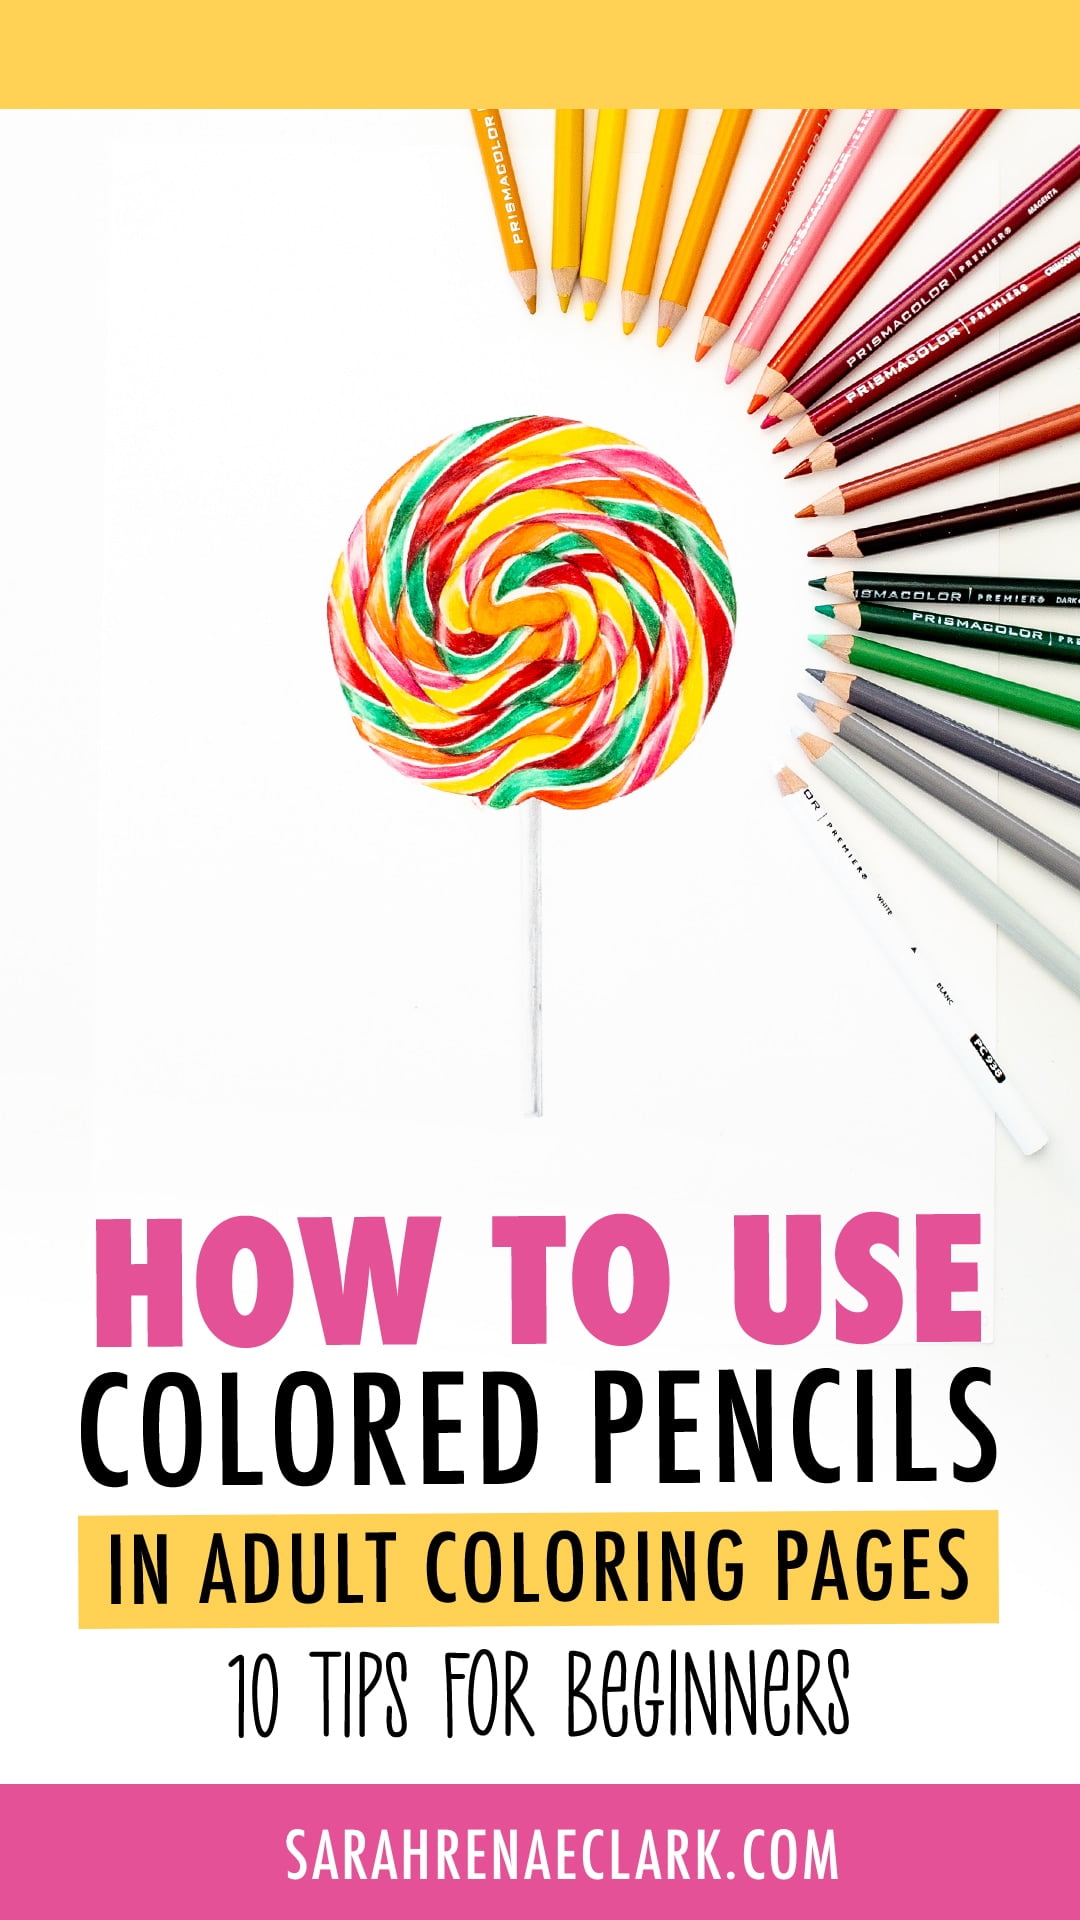 How To Use Colored Pencils